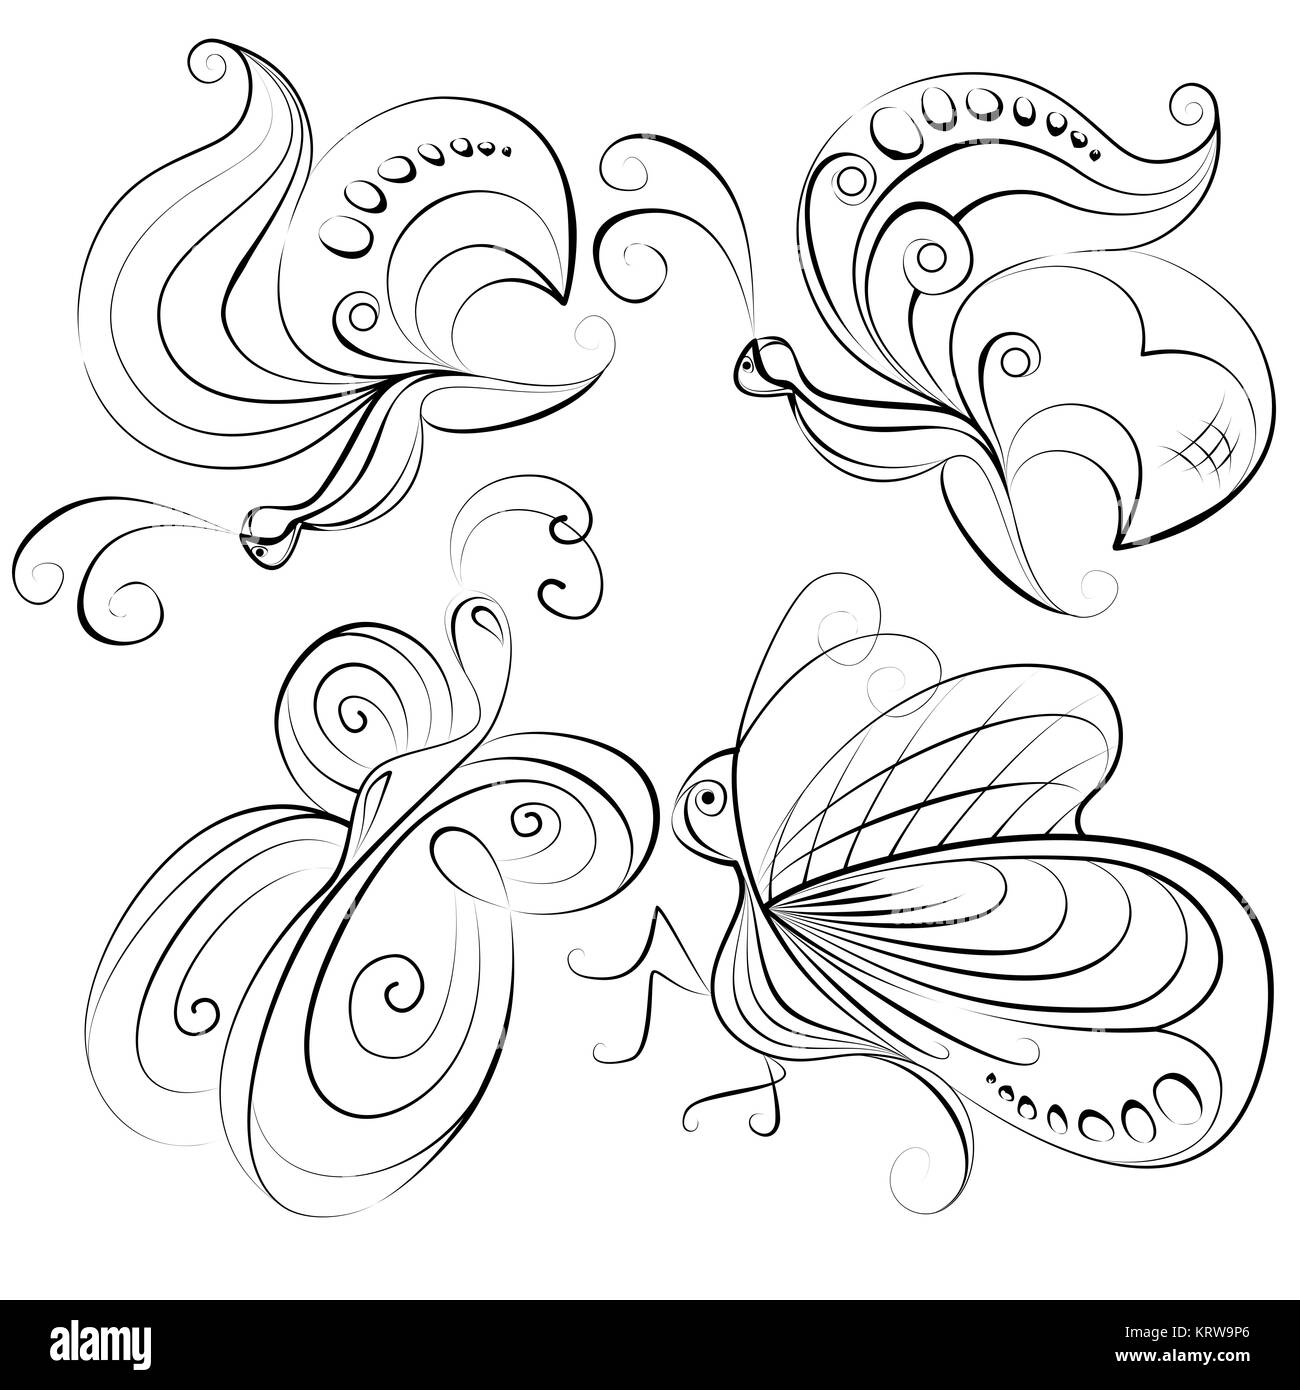 Illustration - four different butterflies without a fill color on white background Stock Photo